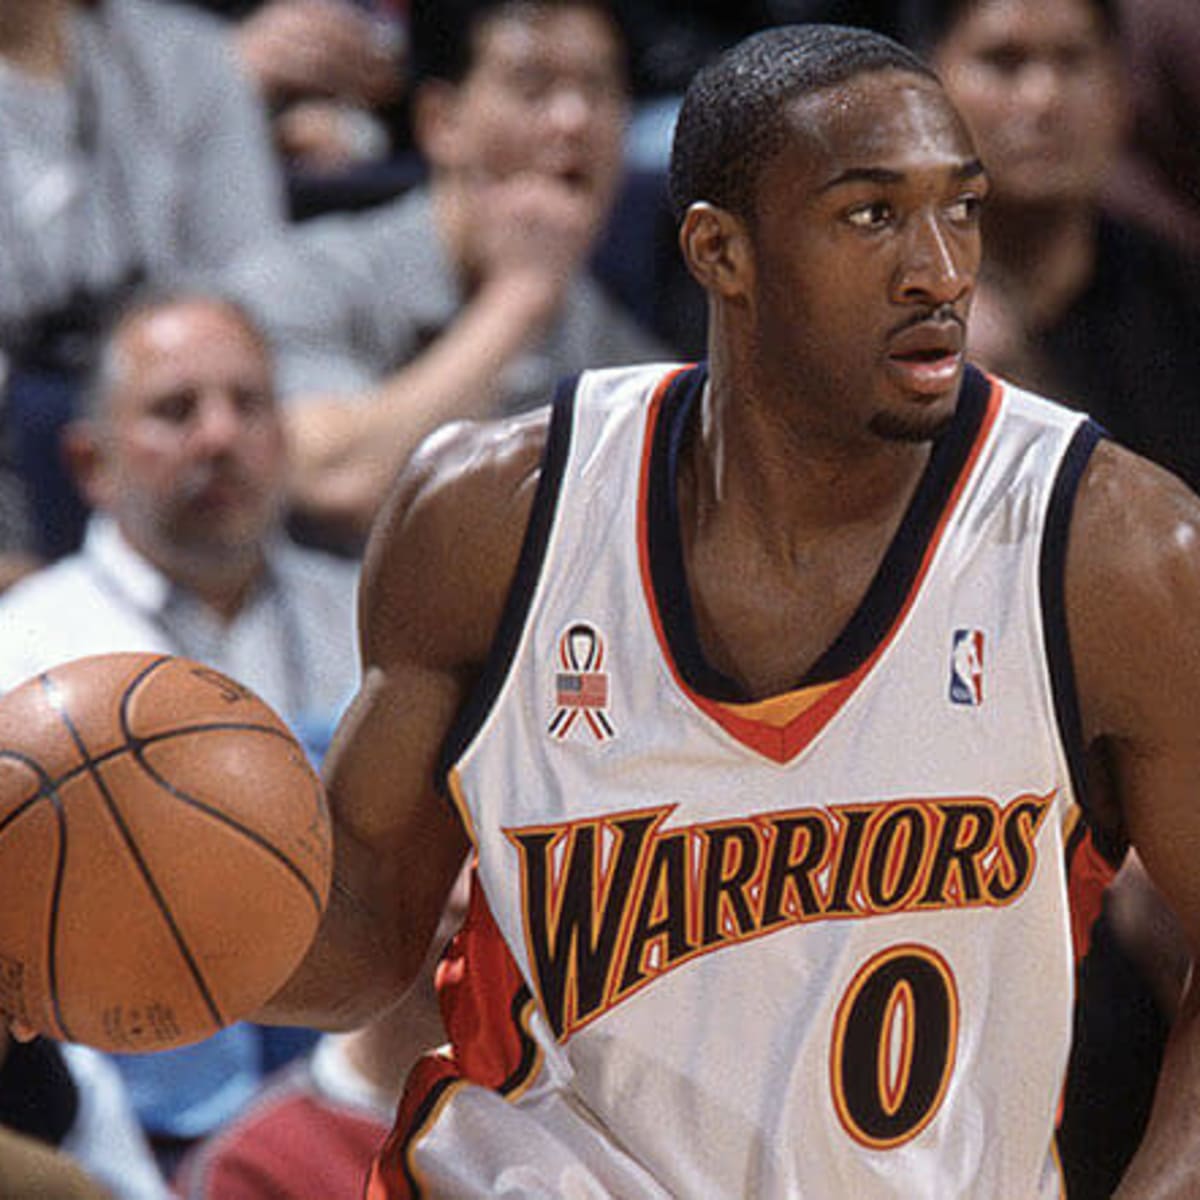 Gilbert Arenas on James Harden's dreadful Game 7 performance against the  Celtics -“I don't know what's going through his mind.”